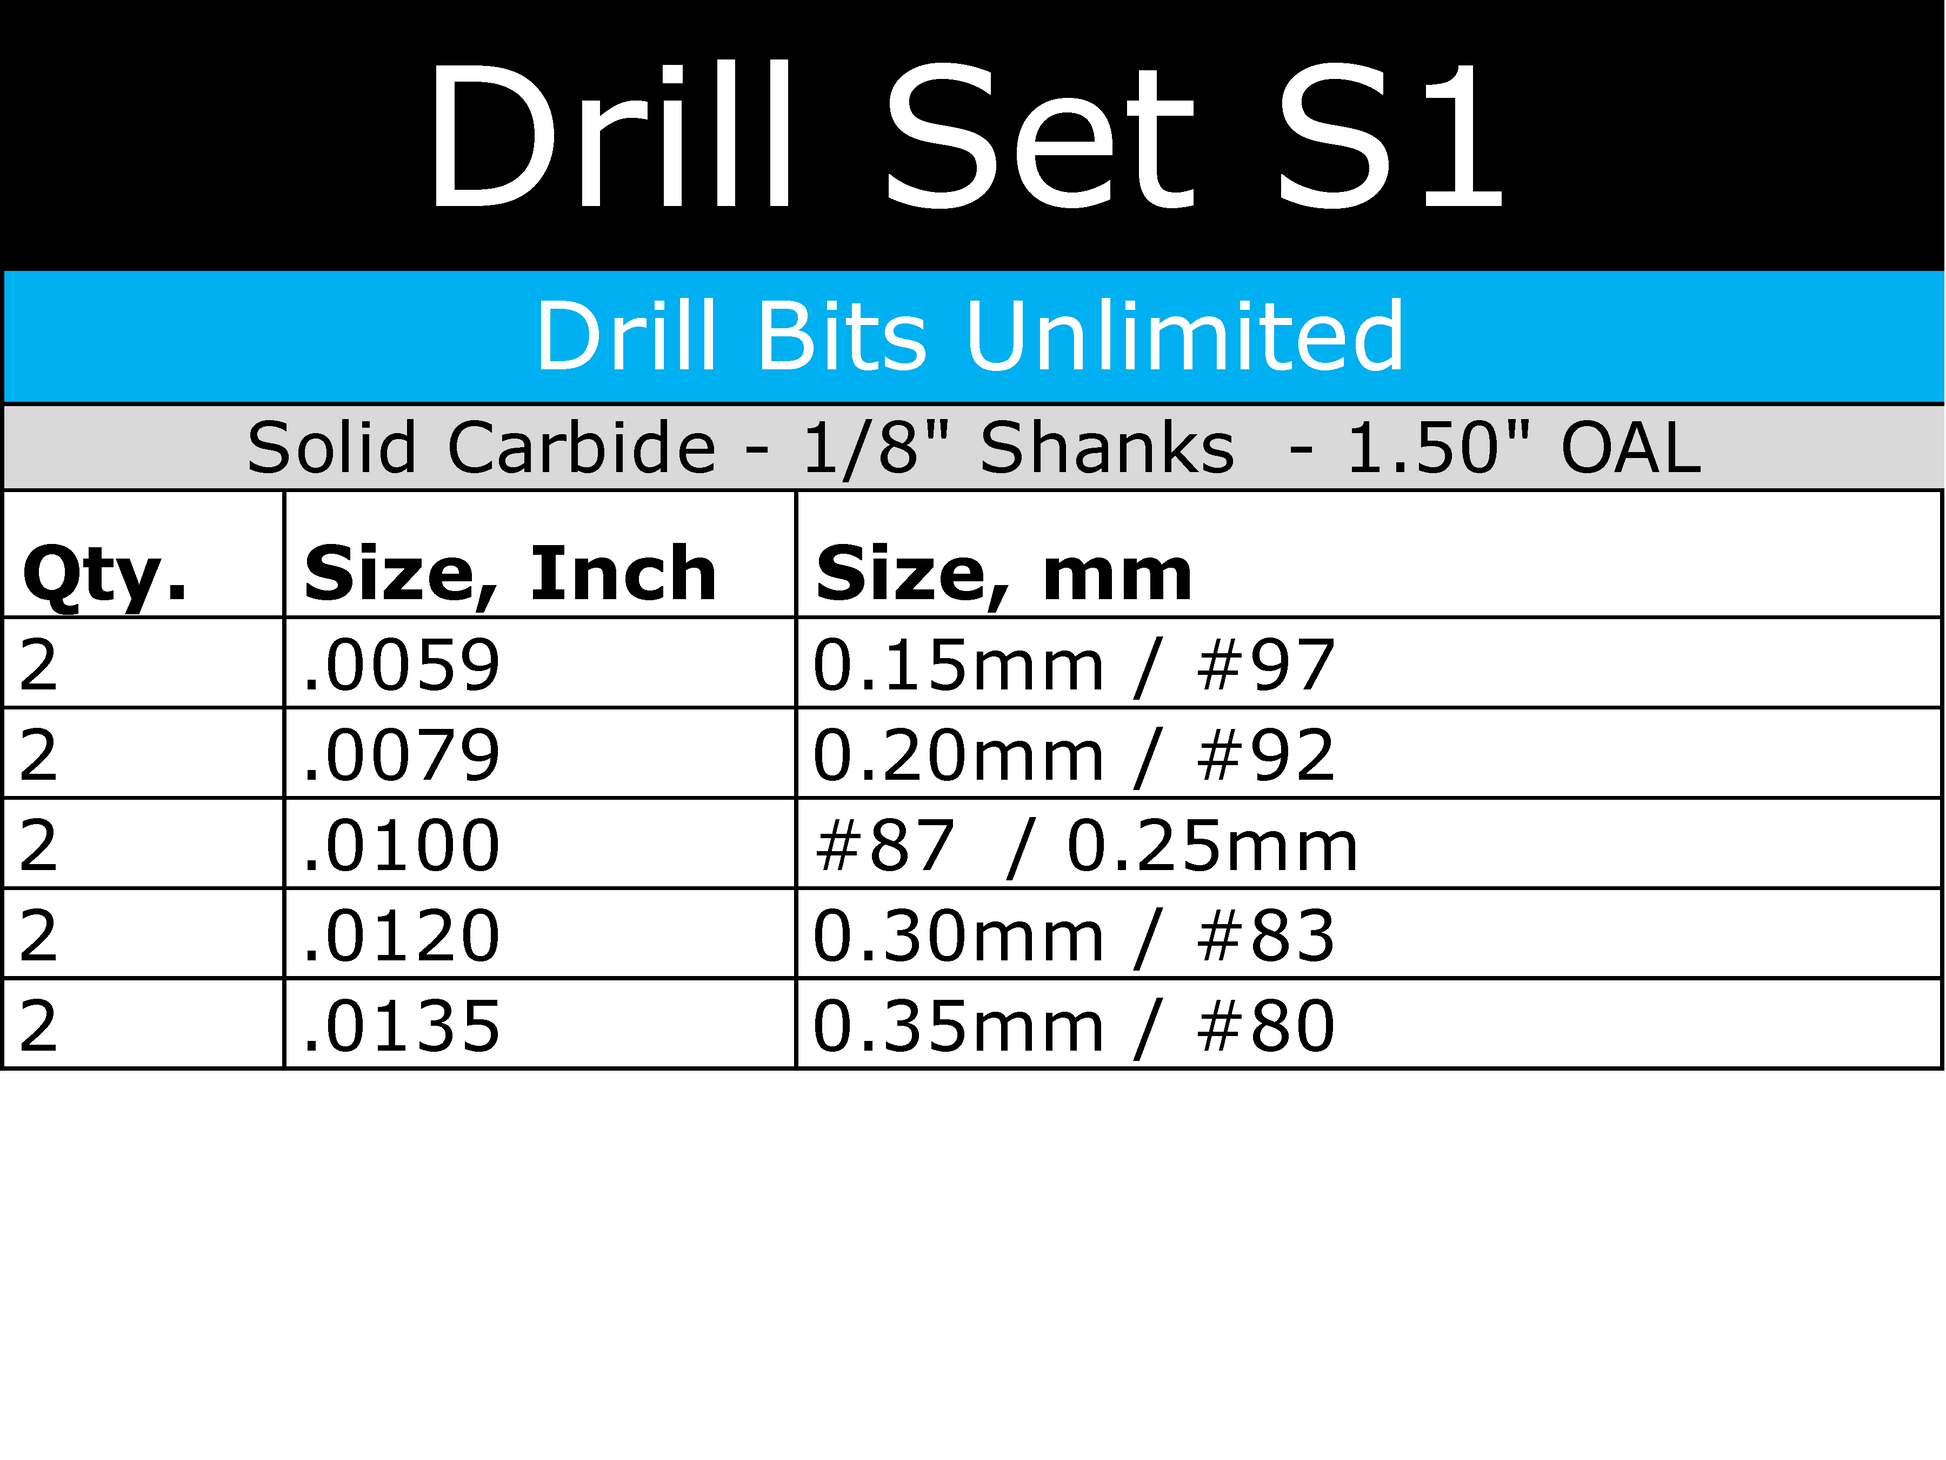 This convenient Solid Carbide Drill Set includes Two Pieces Each: .006" .008" .010" .012" .0135" Carbide Drills